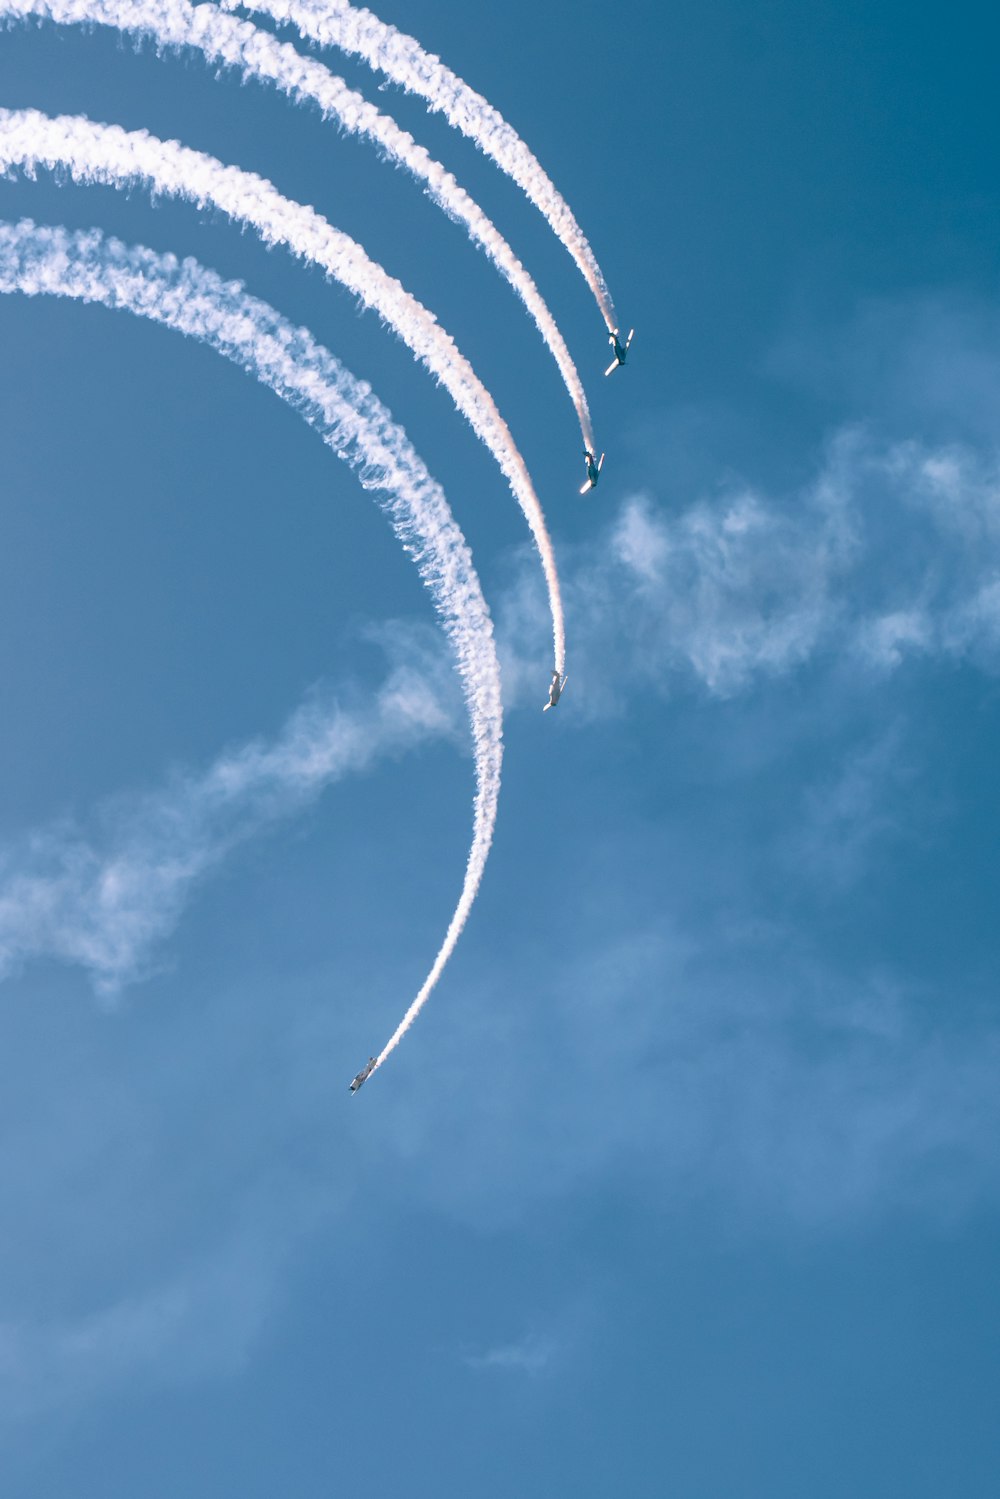 a group of jets flying through a blue sky